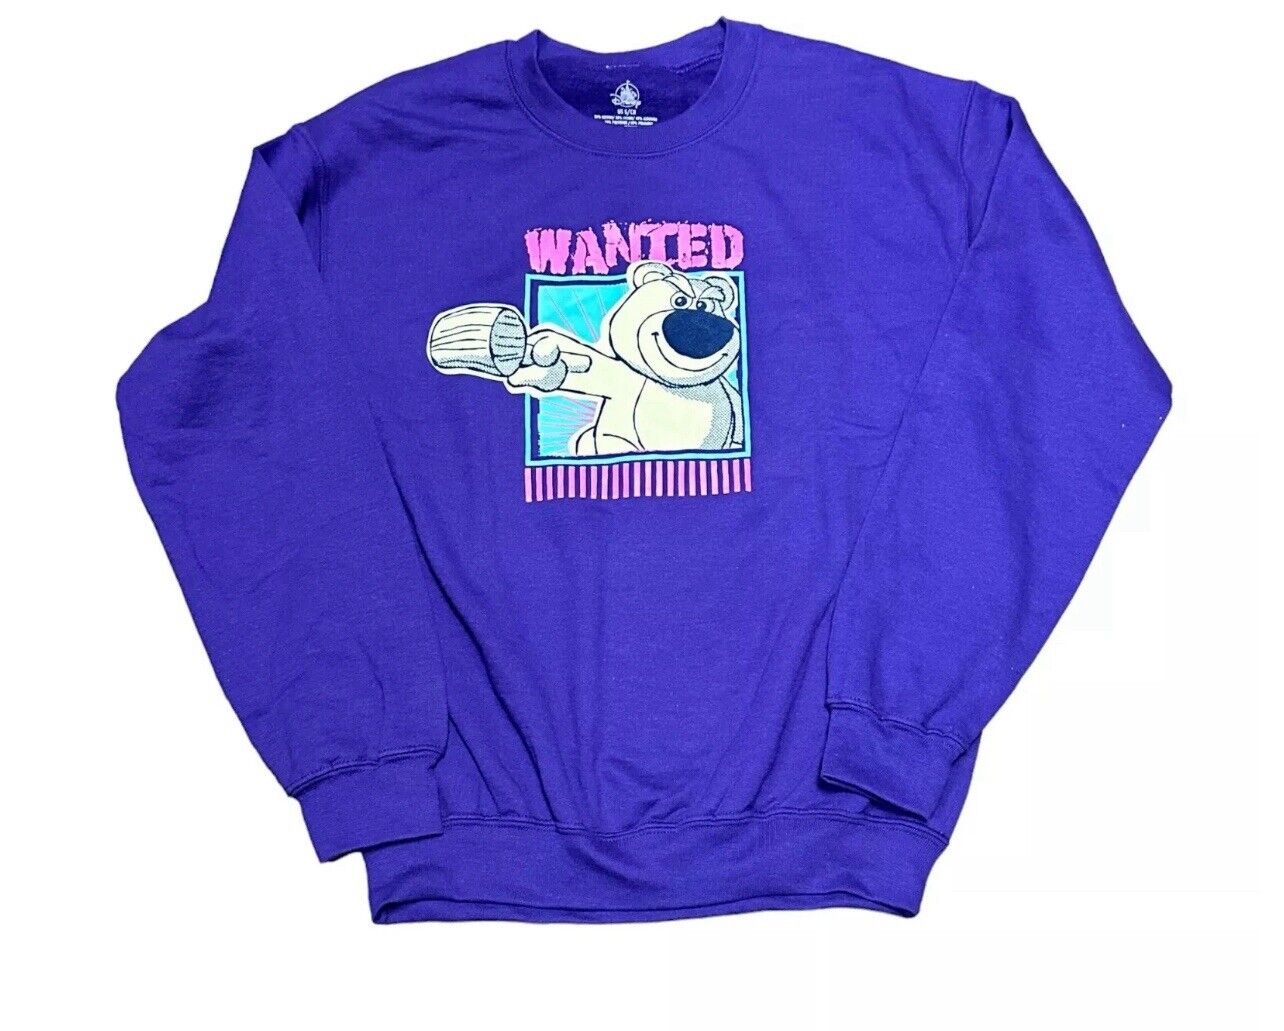 NEW Disney Sweater Adult Large Purple Lotso Bear Toy Story Wanted Pixar Mens